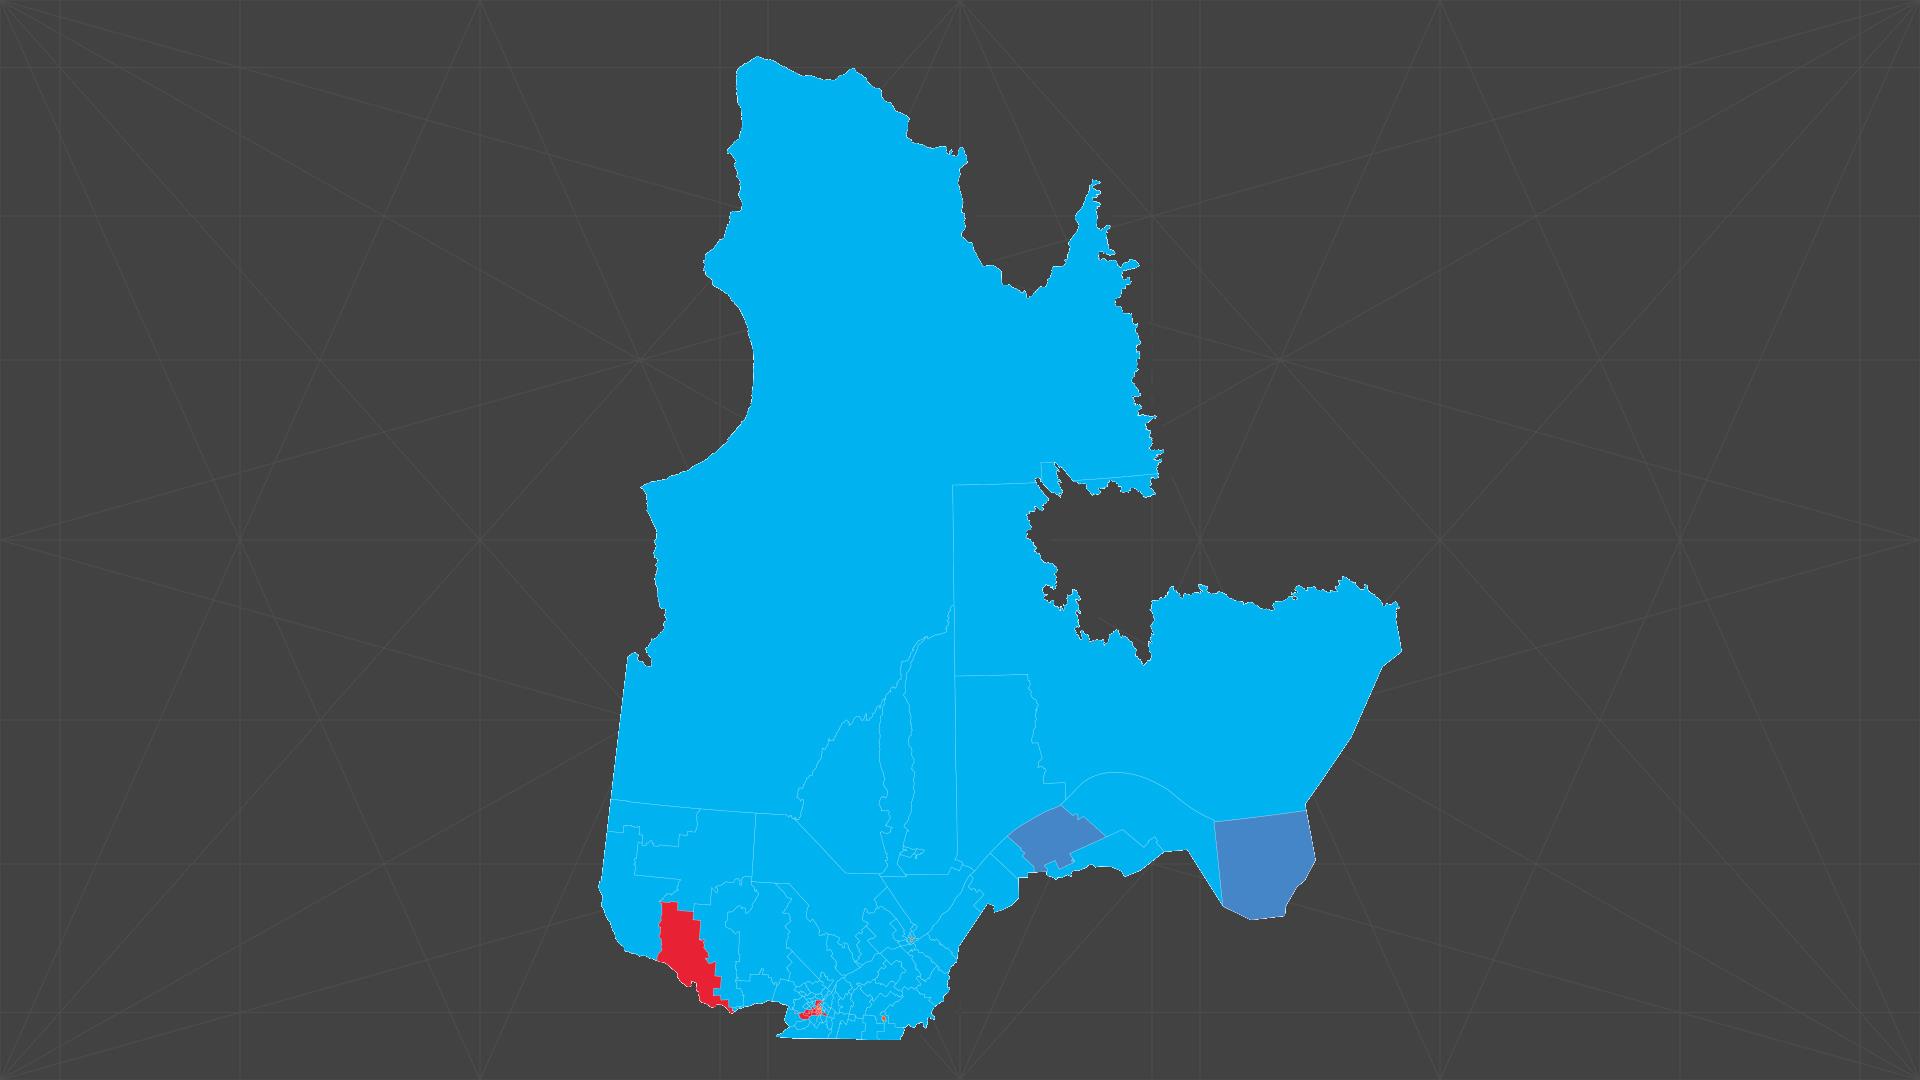 Here you can see maps showing where the election took place